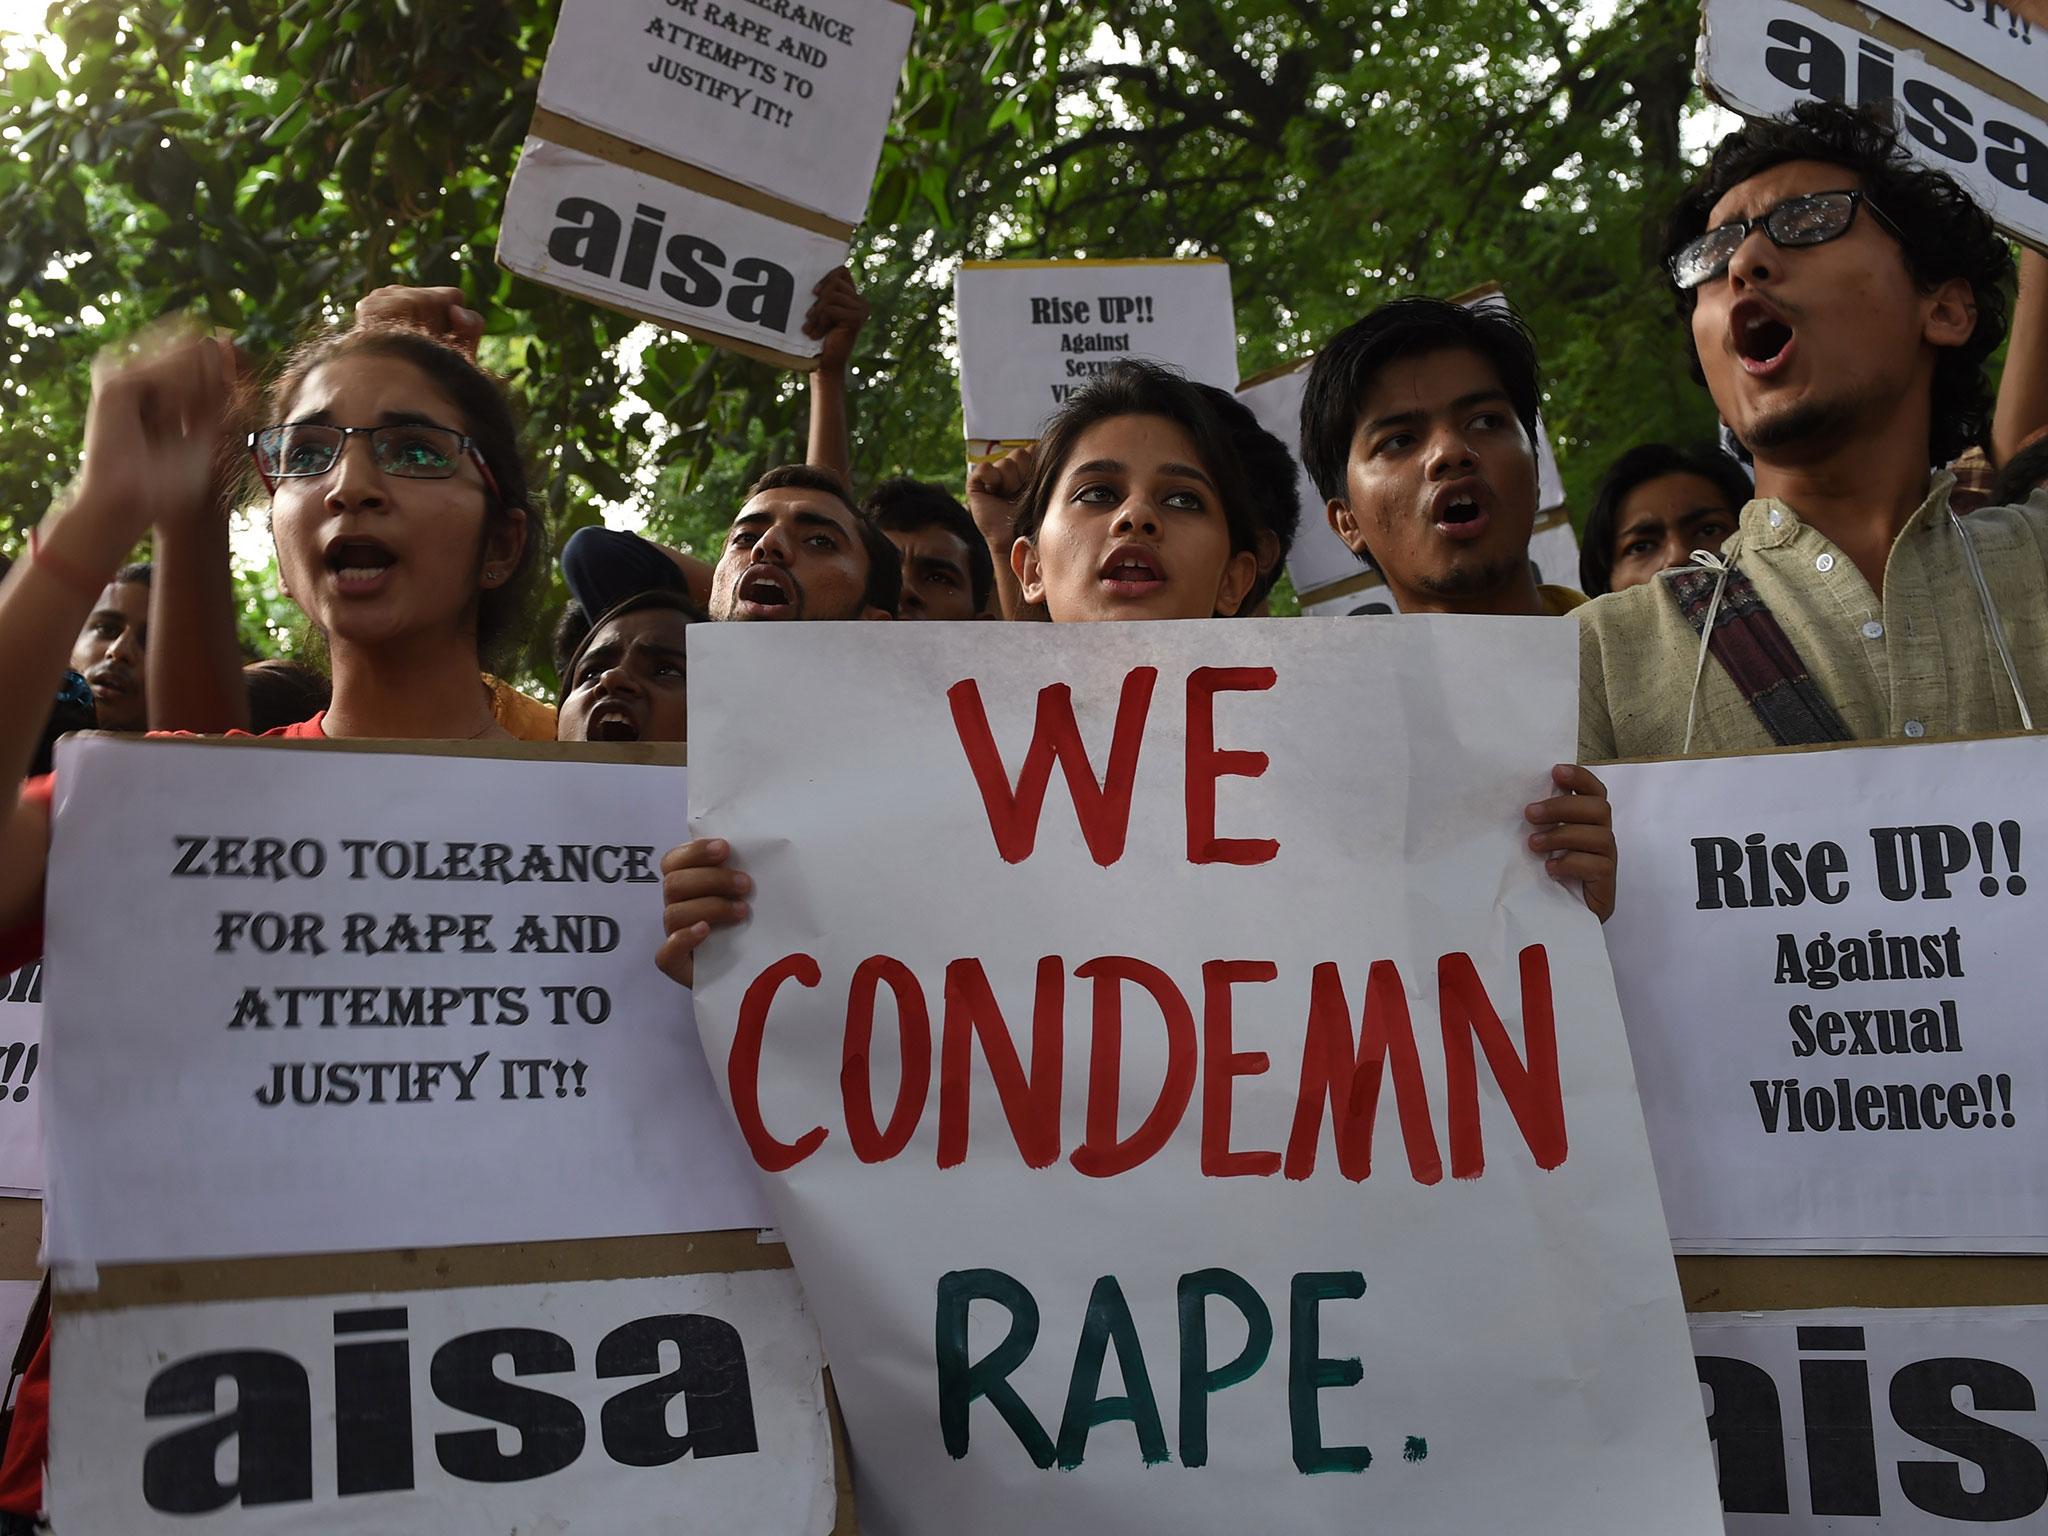 Kannada Sex Videos Rep - Gang rape' of student prompts arrests after video causes outcry in India |  The Independent | The Independent